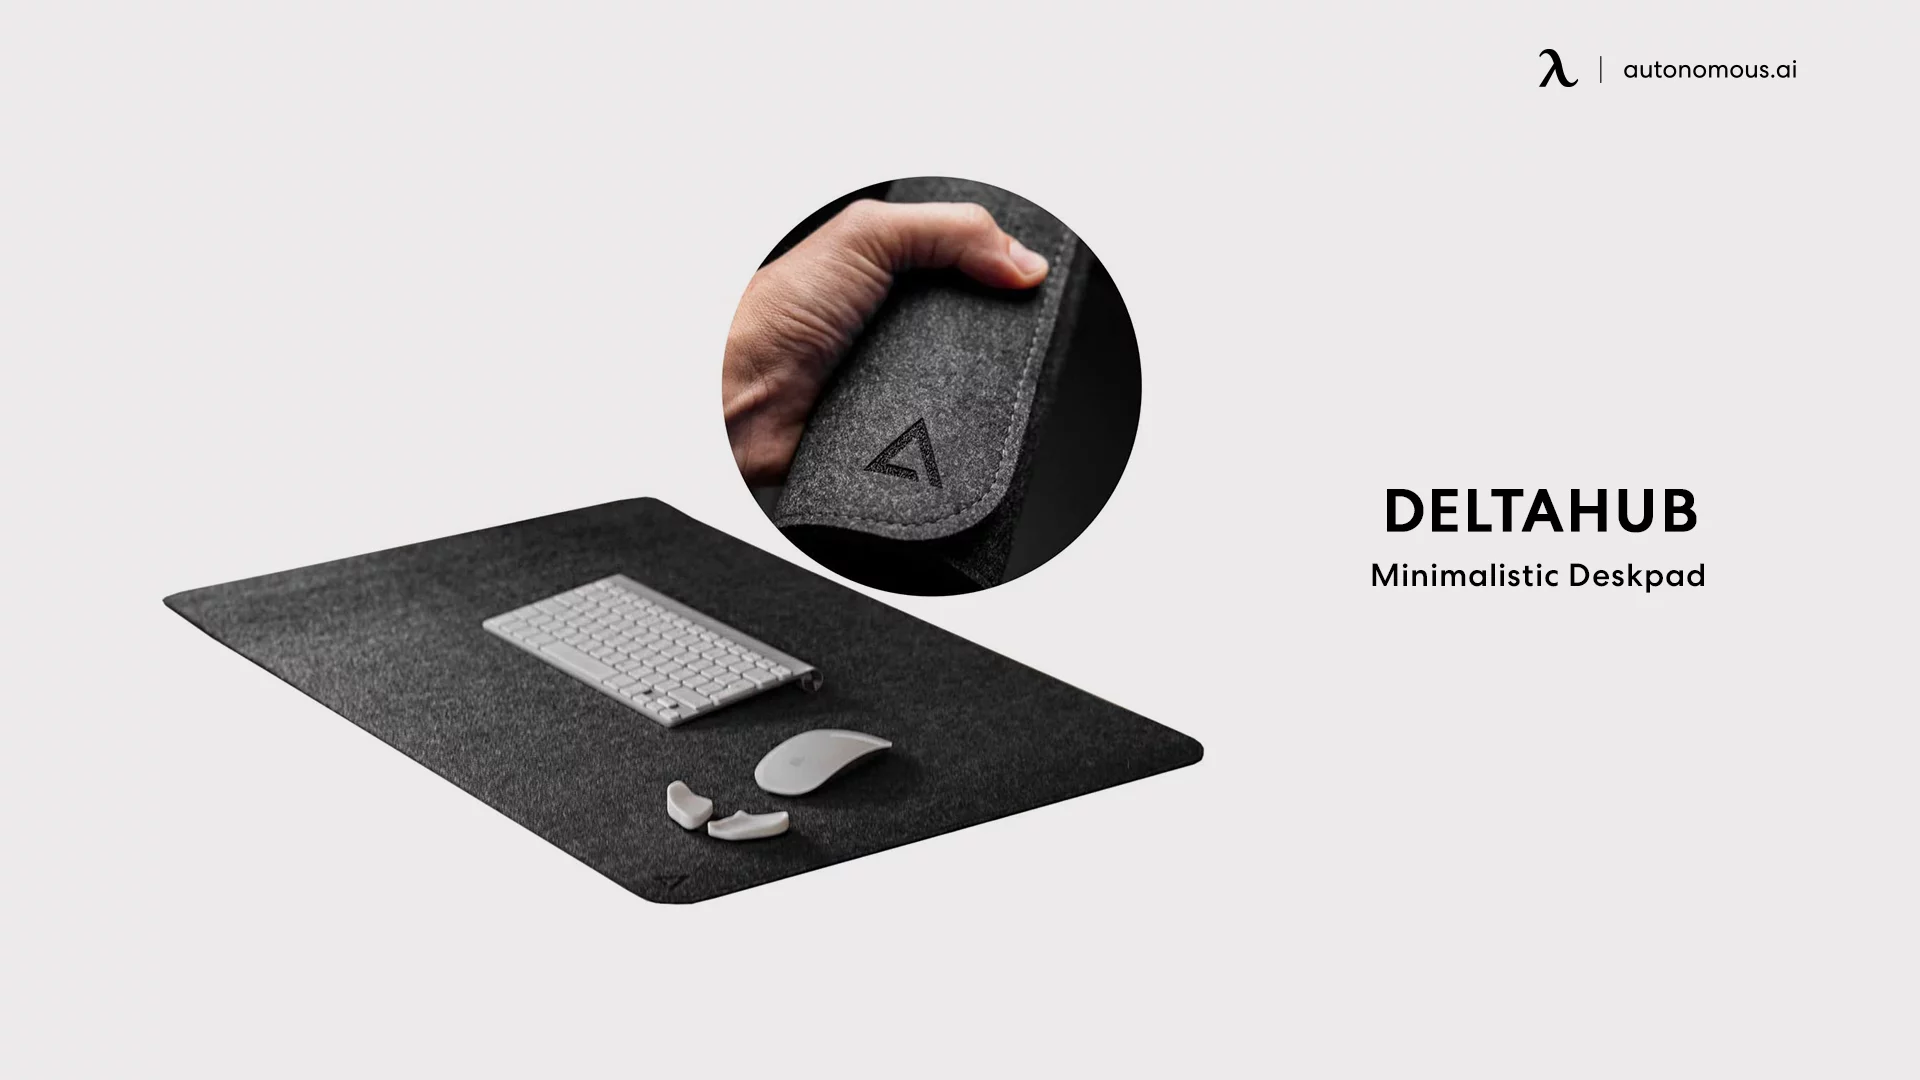 Minimalist Desk Pad by DeltaHub Father's Day sales